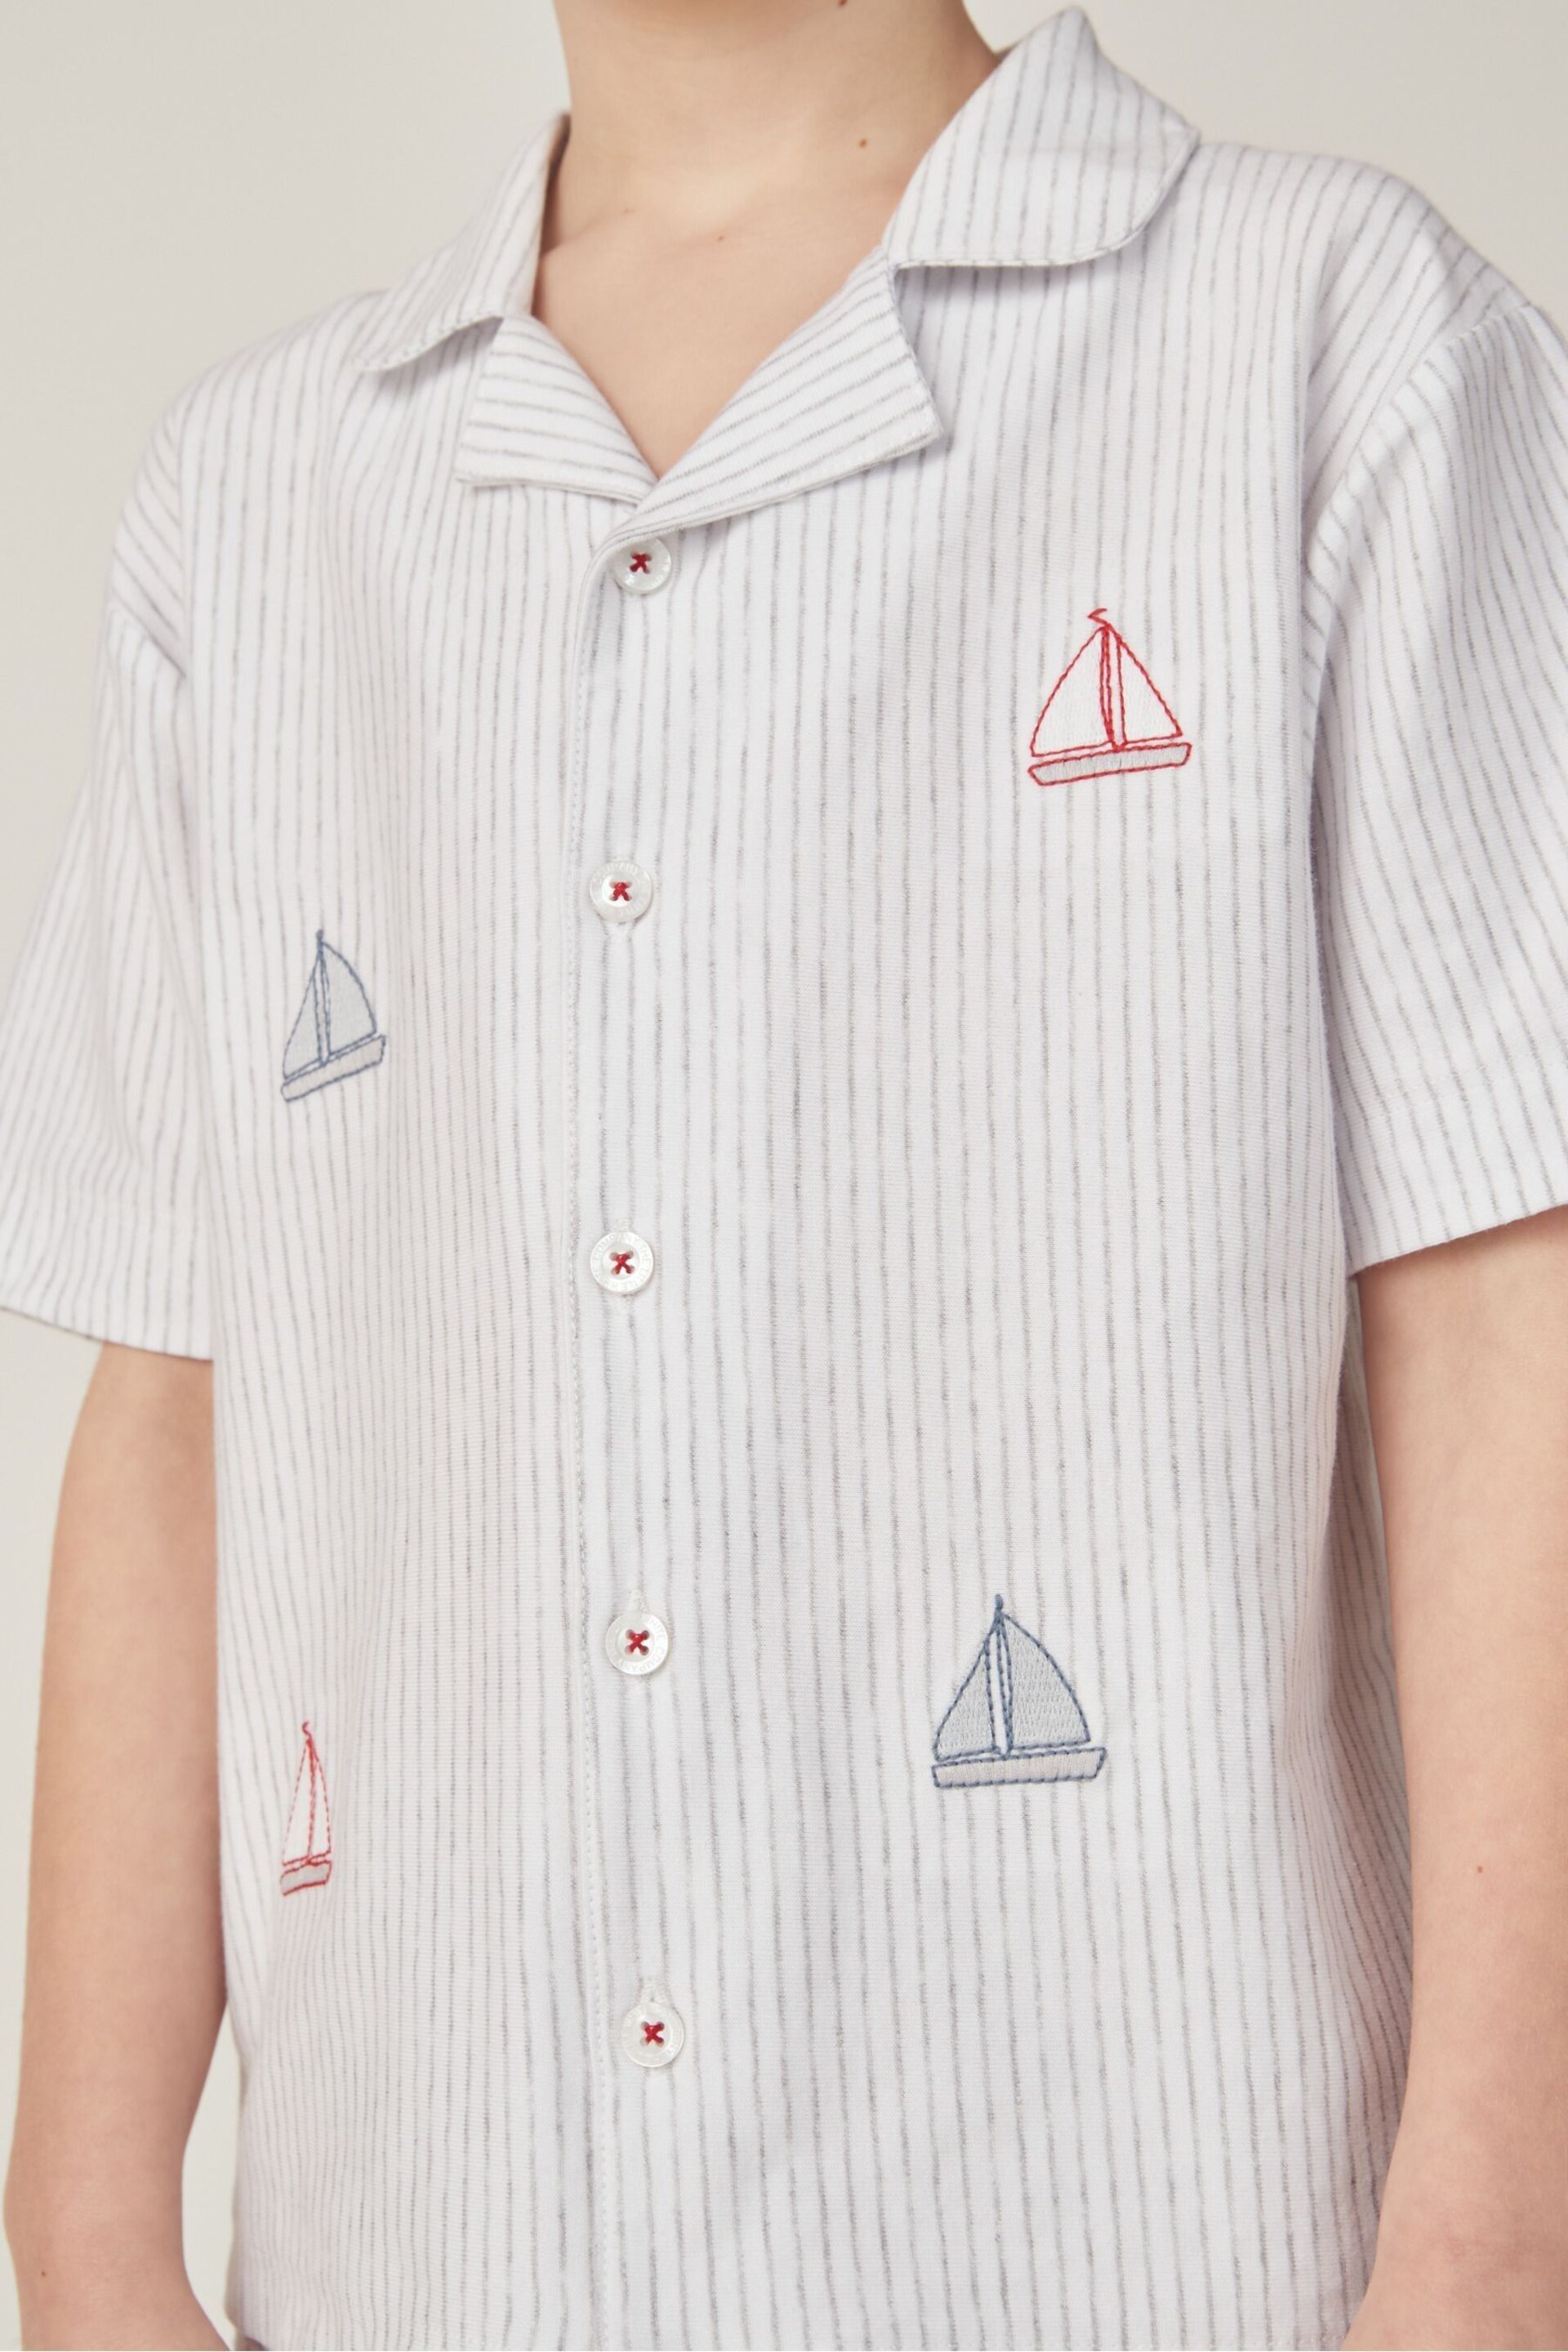 The White Company White Cotton Classic Sailboat Embroidered Shortie Pyjamas - Image 3 of 6